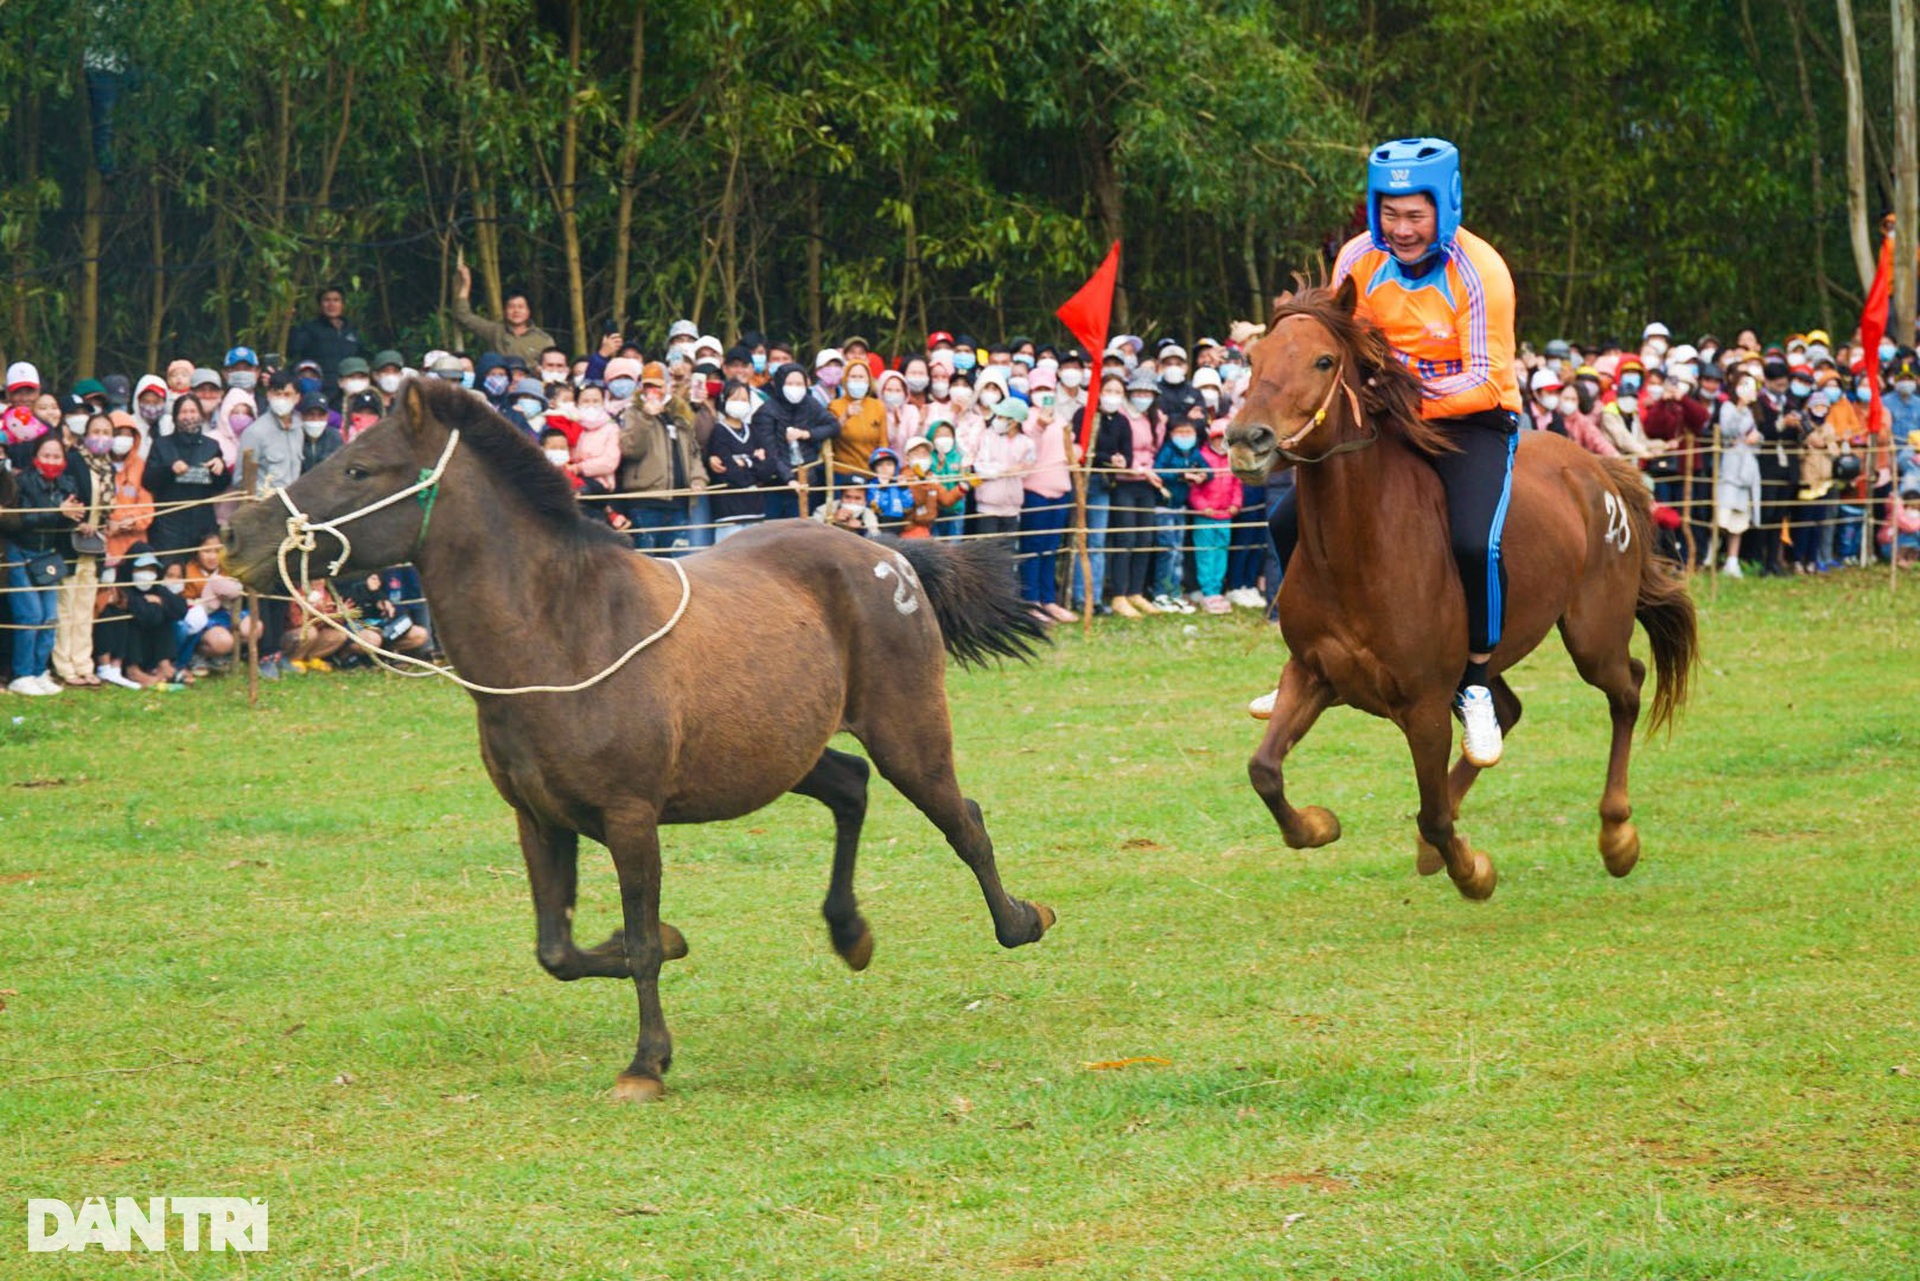 Thousands of people enjoy watching farmers race horses in Go Thi Thung festival - 5